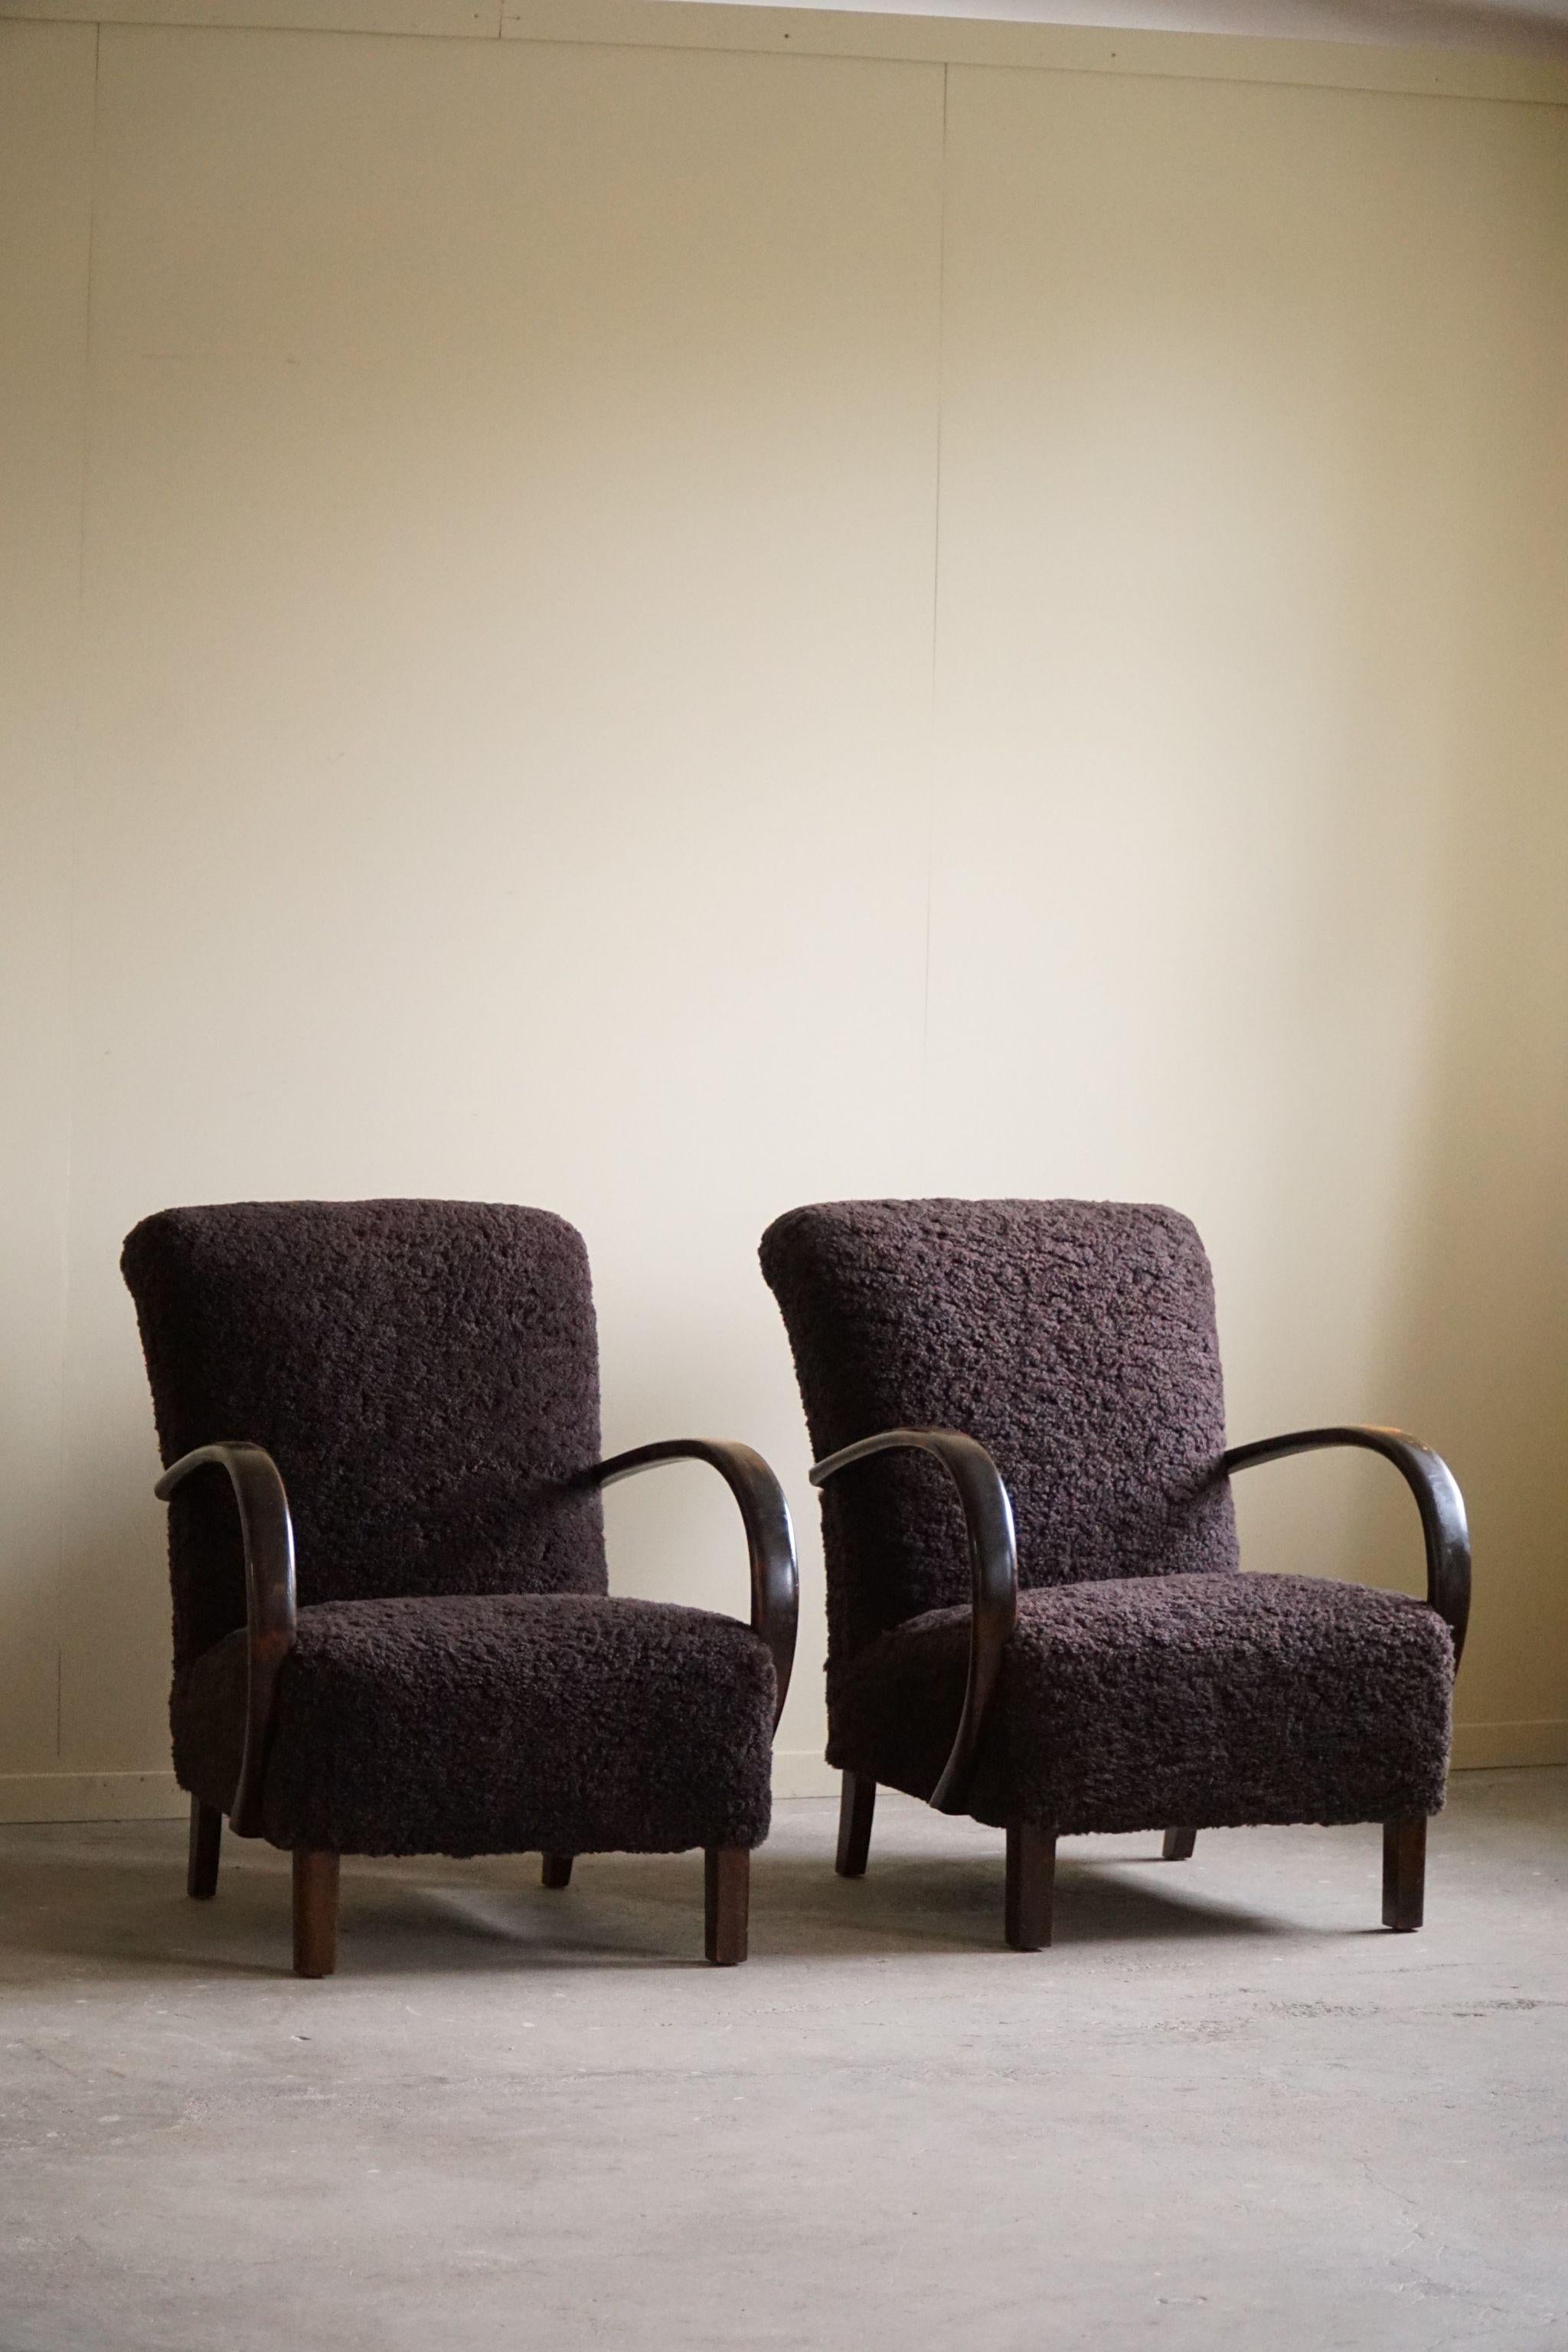 A Pair of Danish Mid Century Modern Lounge Chairs in Beech & Lambswool, 1940s For Sale 10